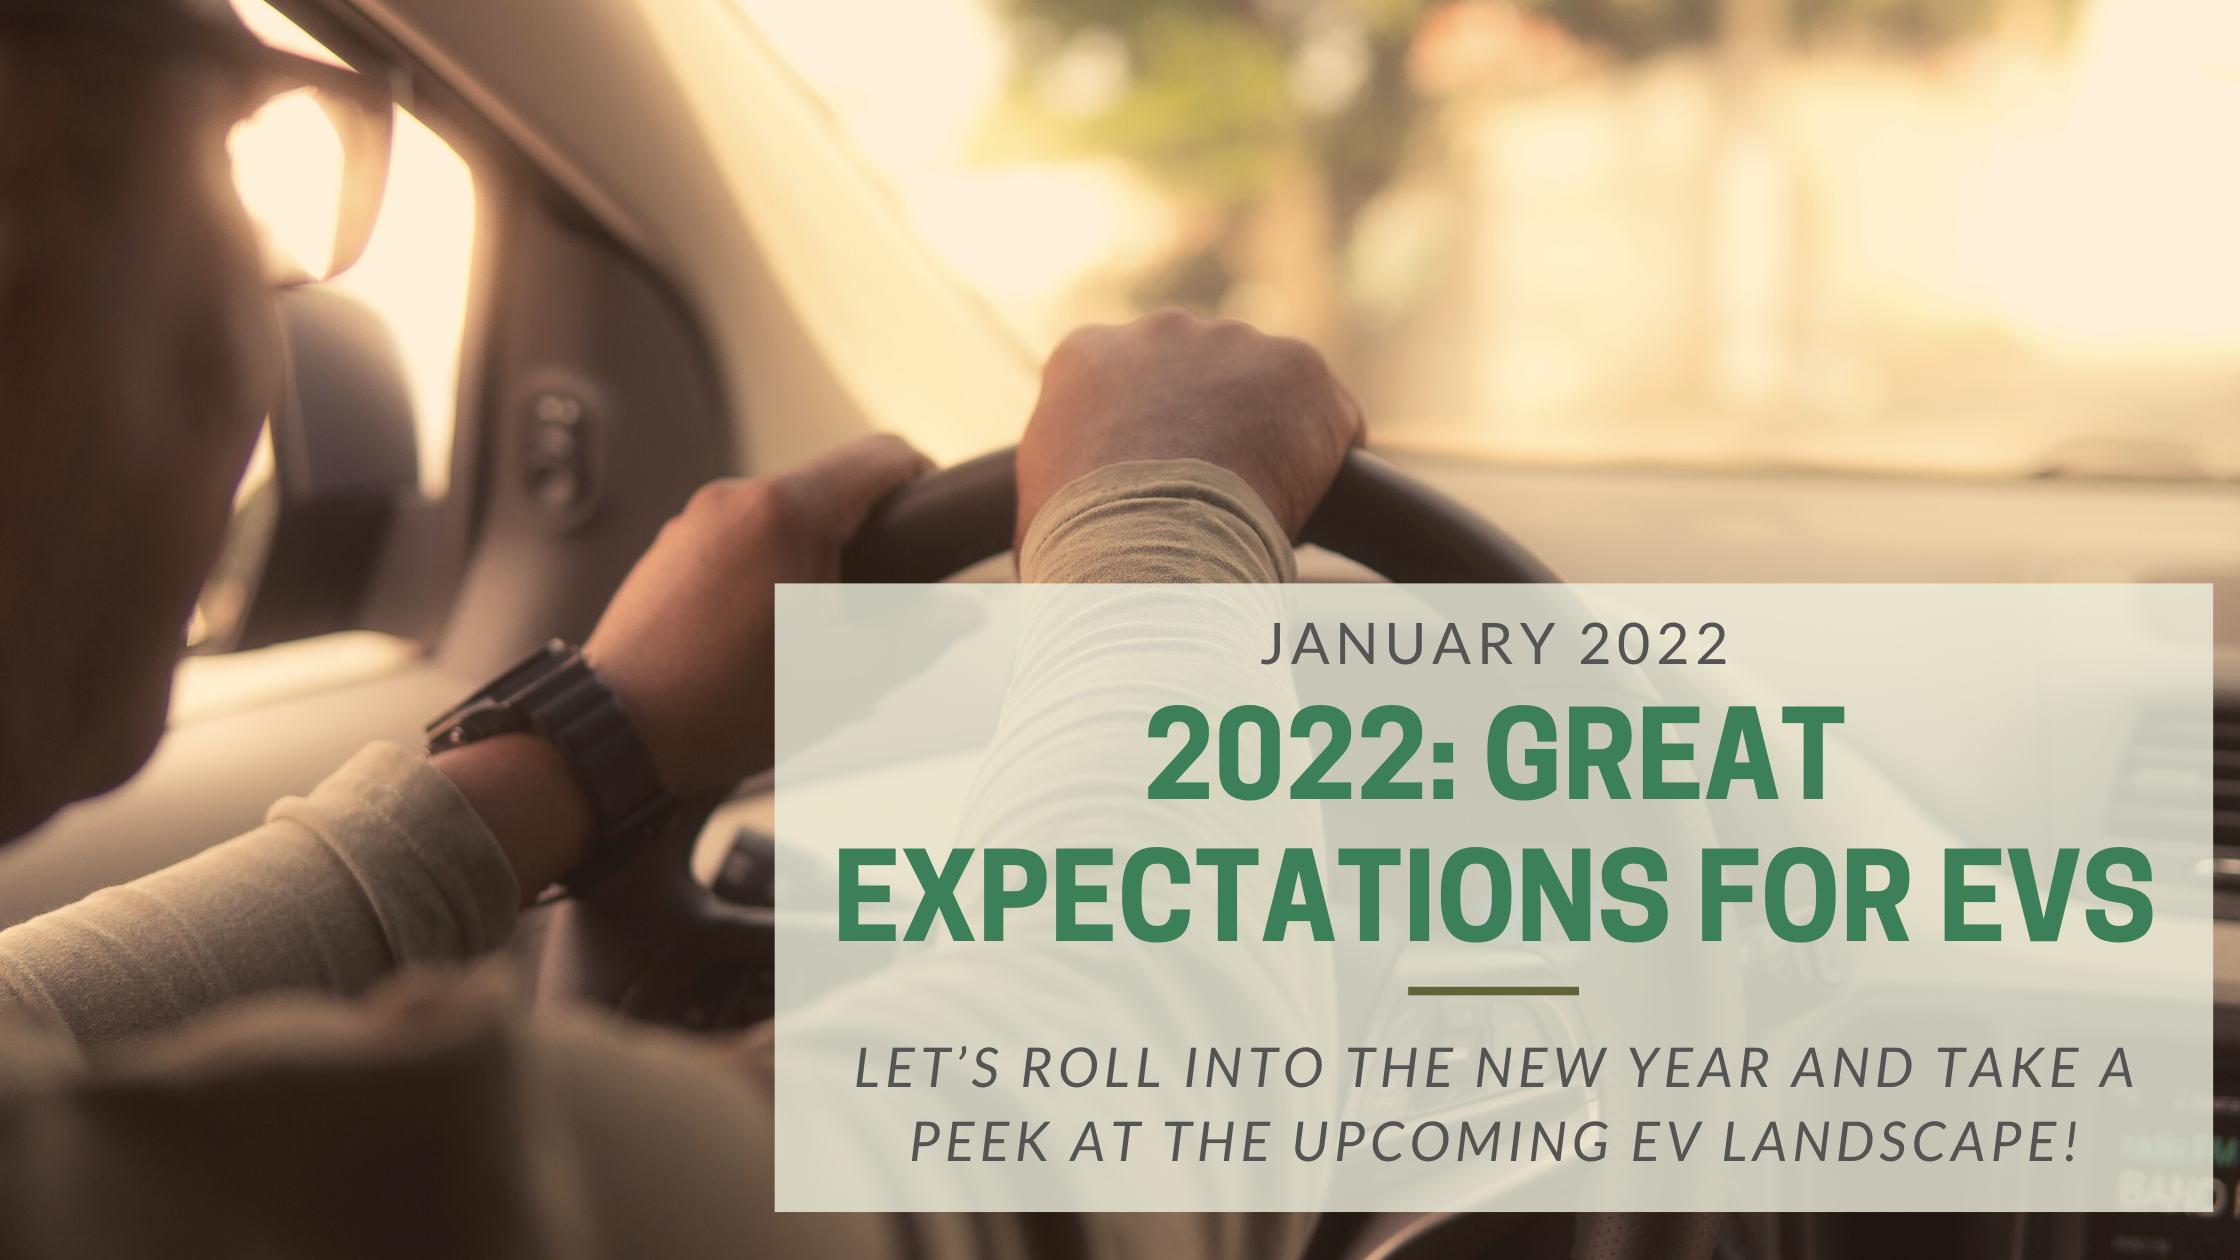 2022: Great Expectations for EVs